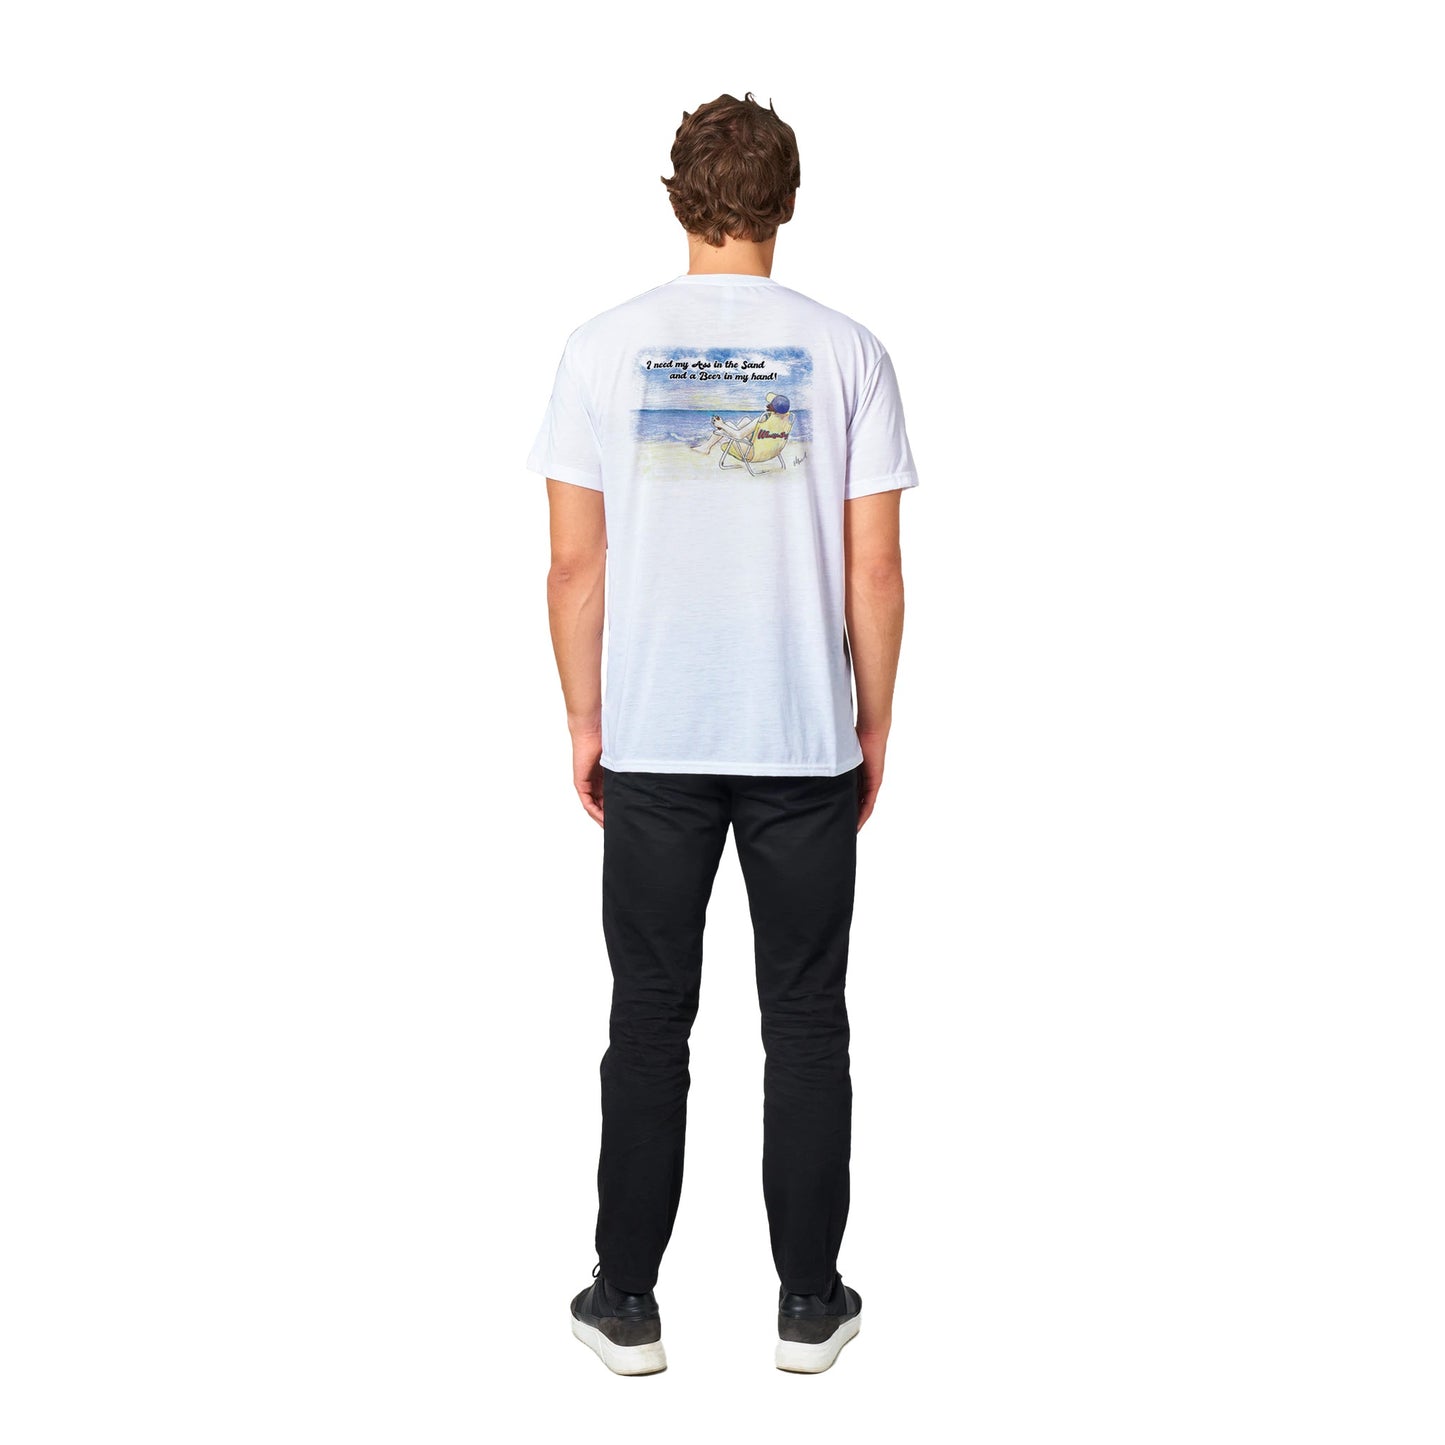 A white Performance Moisture-wicking with PosiCharge Unisex Crewneck t-shirt with original artwork and motto I need my Ass in the Sand and a Beer in my hand on back and WhatYa Say logo on front from WhatYa Say Apparel rear view of short-haired male model standing.